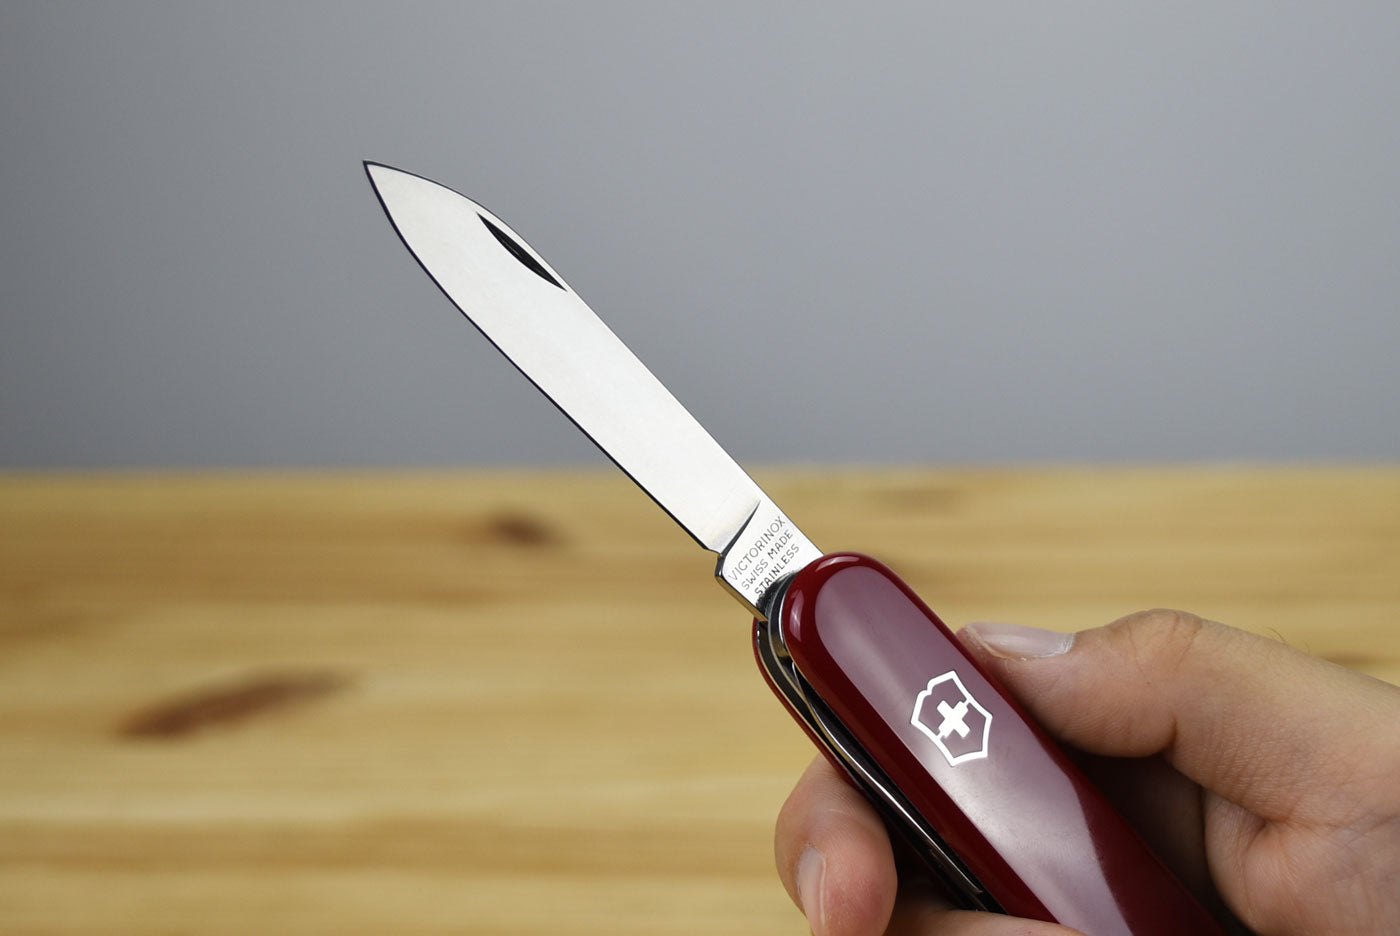 Victorinox Compact - 5 Minute Review 